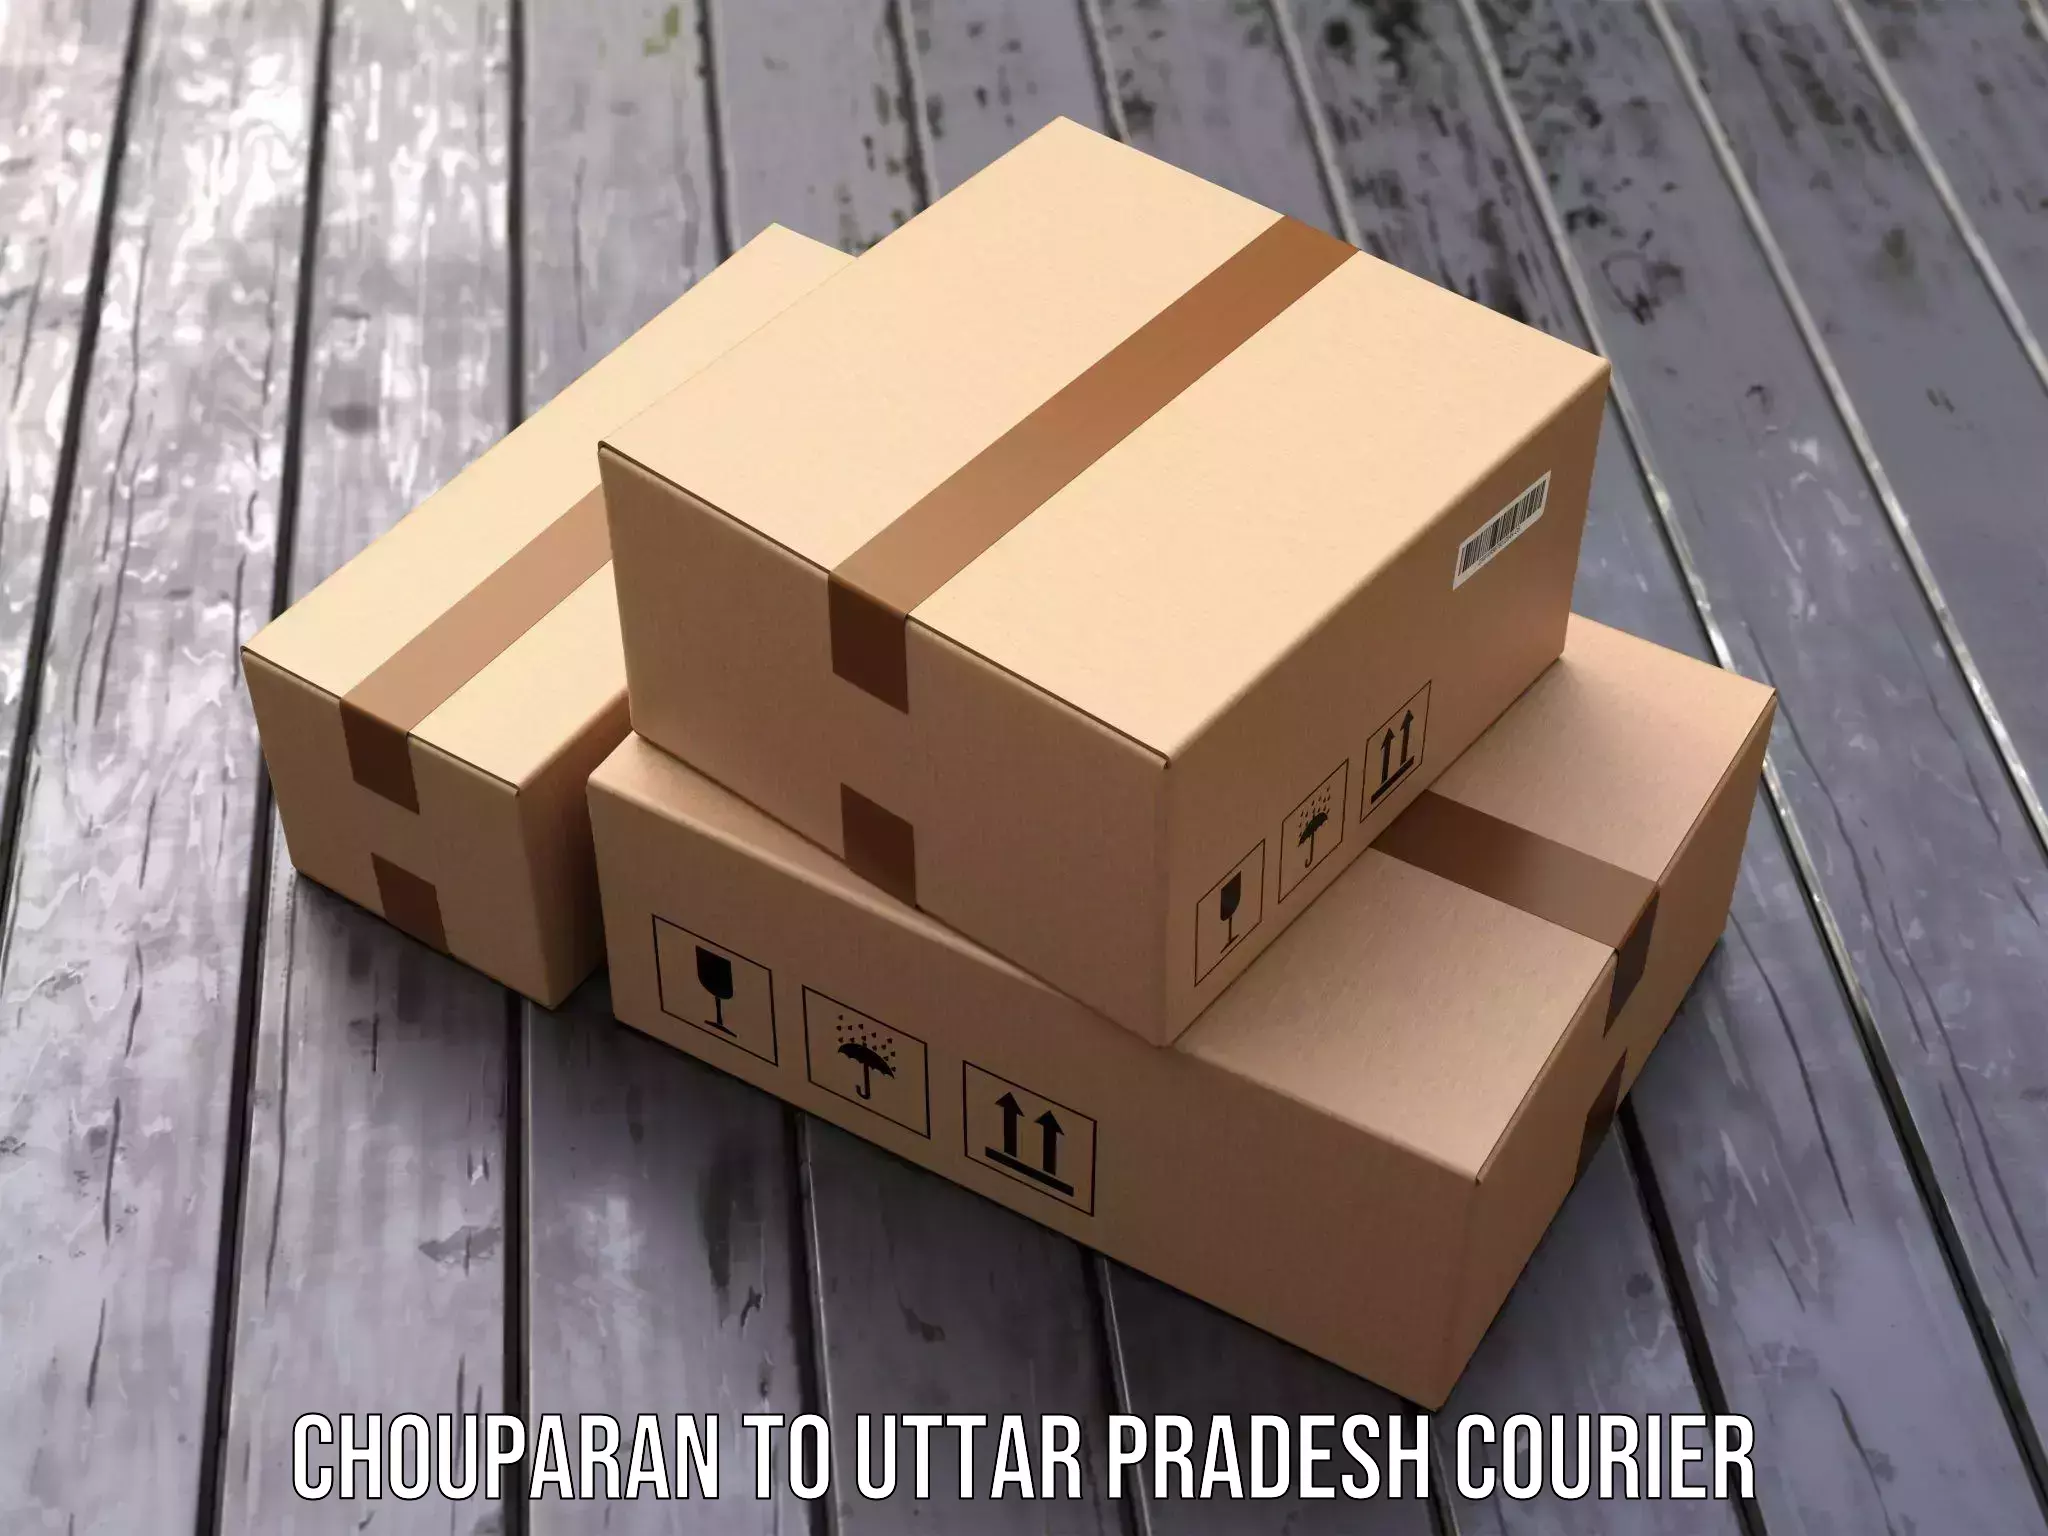 Multi-service courier options Chouparan to Ghazipur